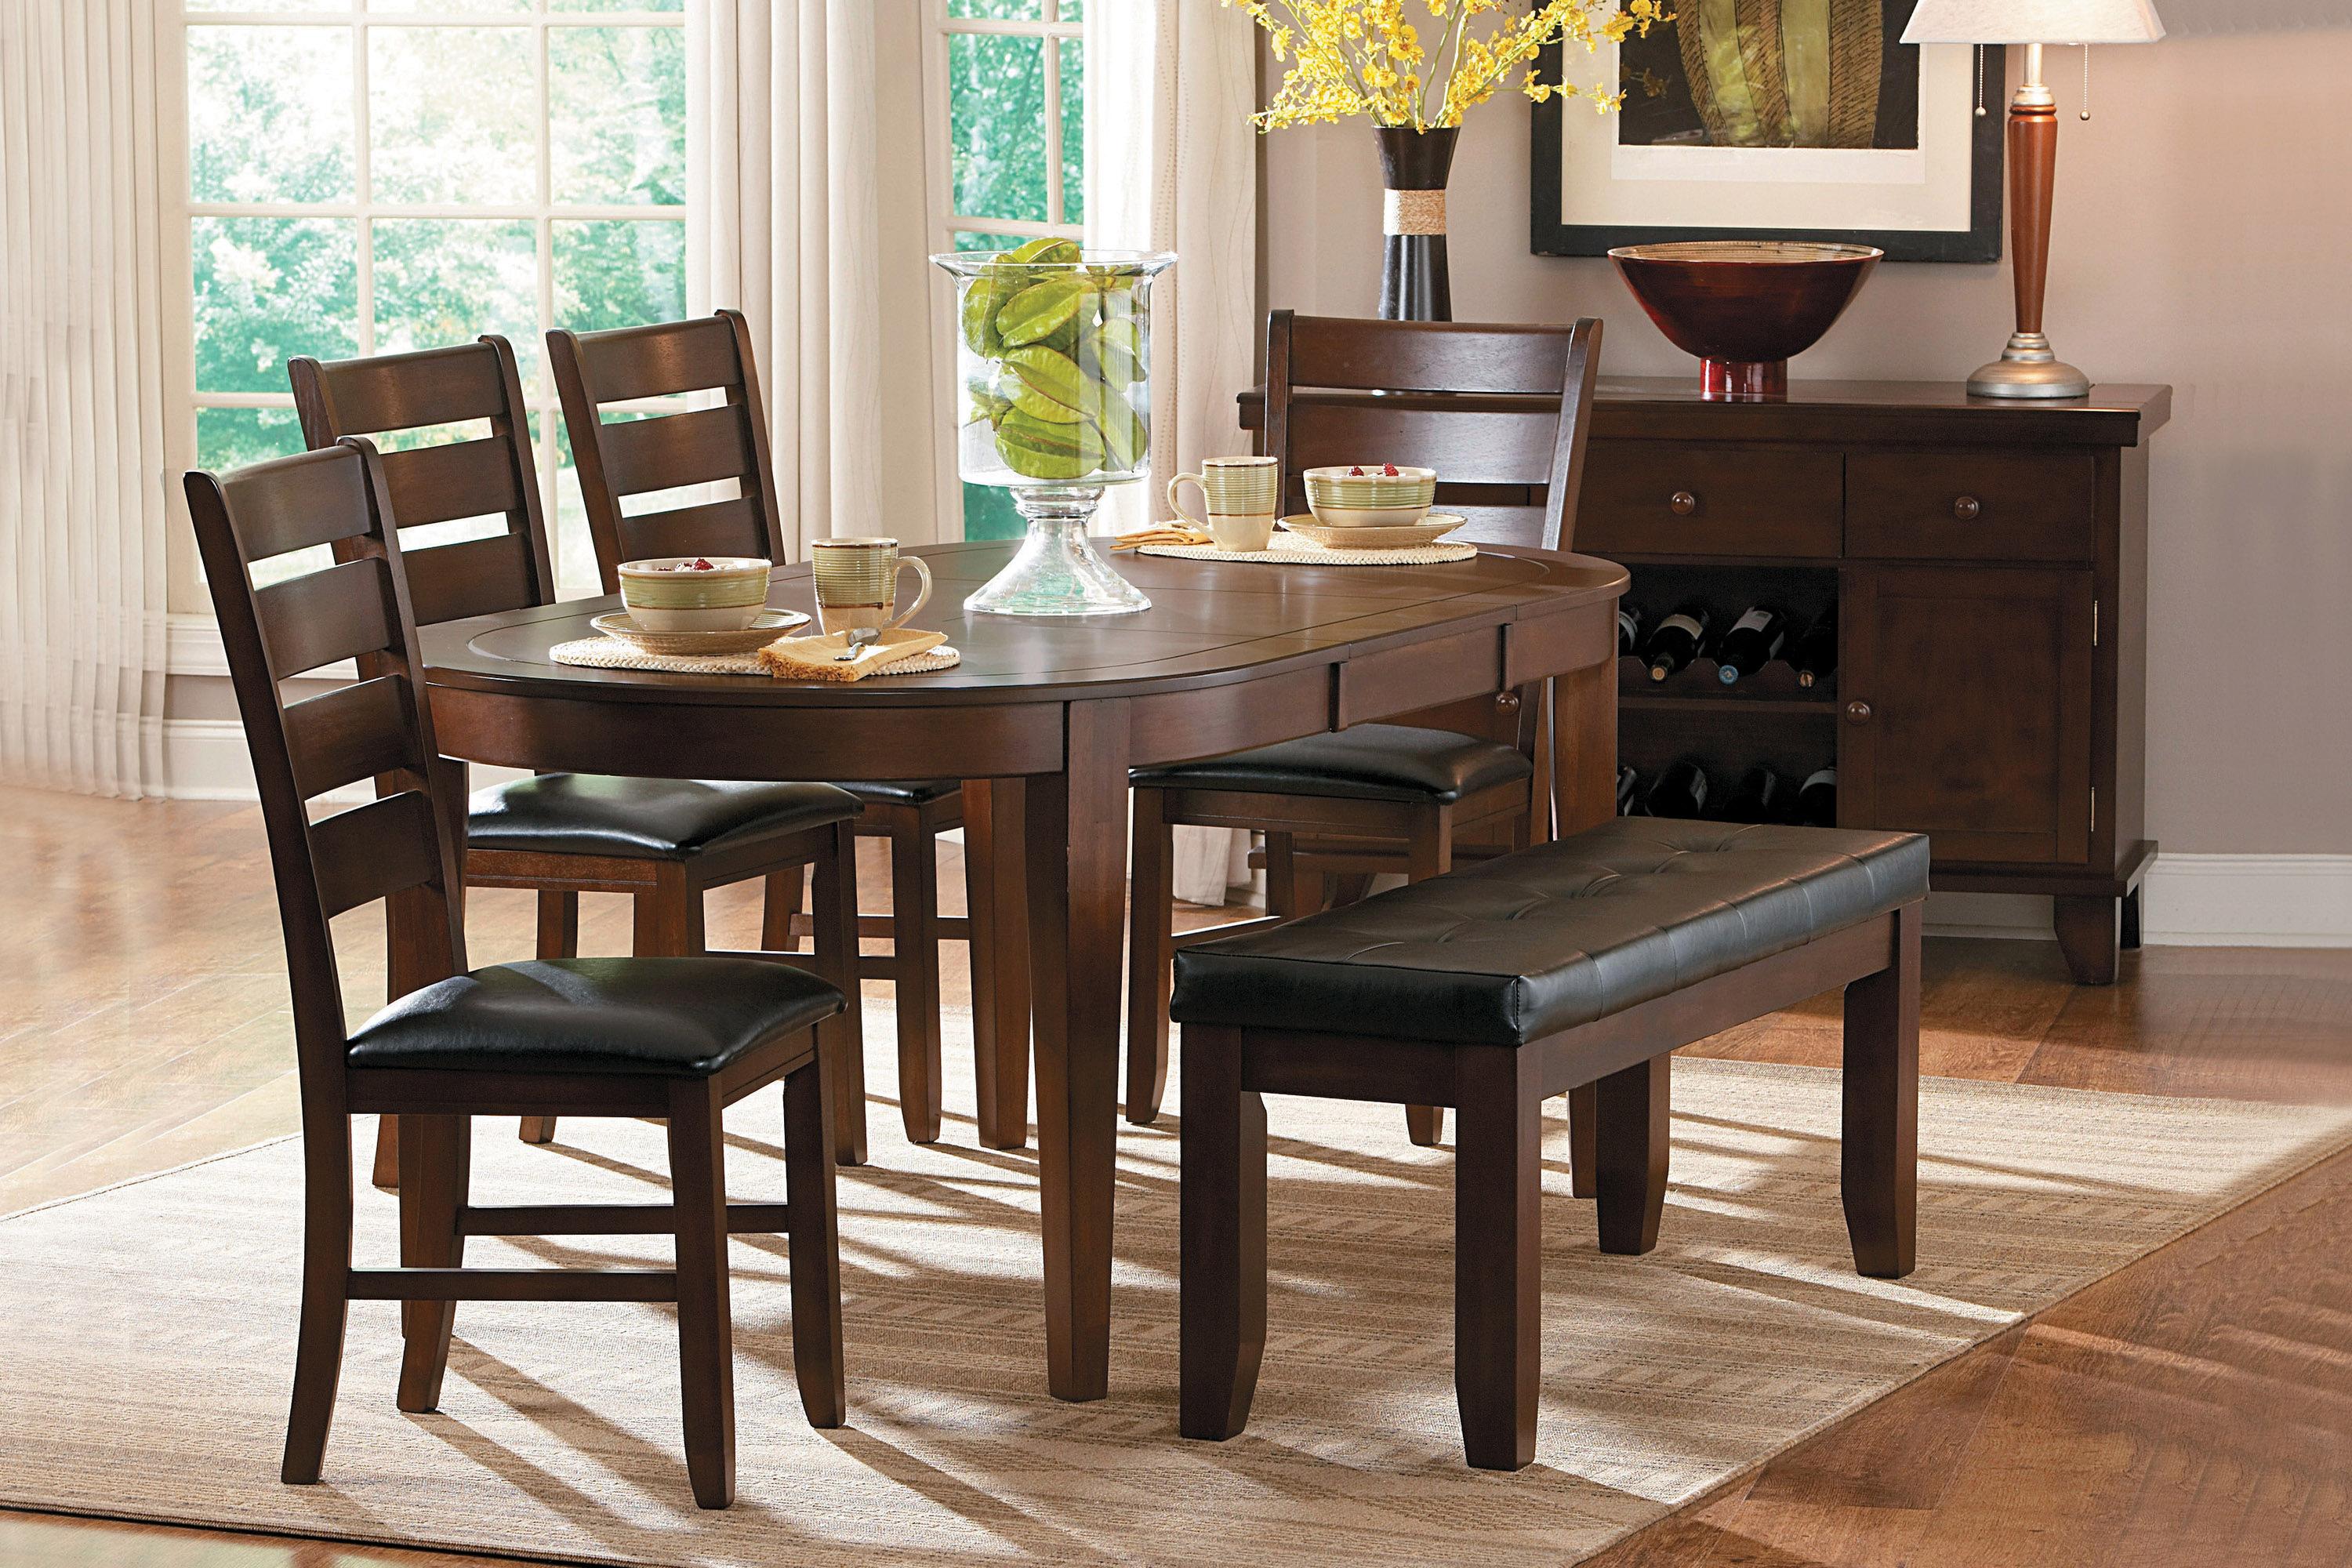 Contemporary Dining Room Set 586-76*8PC Ameillia 586-76*8PC in Dark Oak Faux Leather